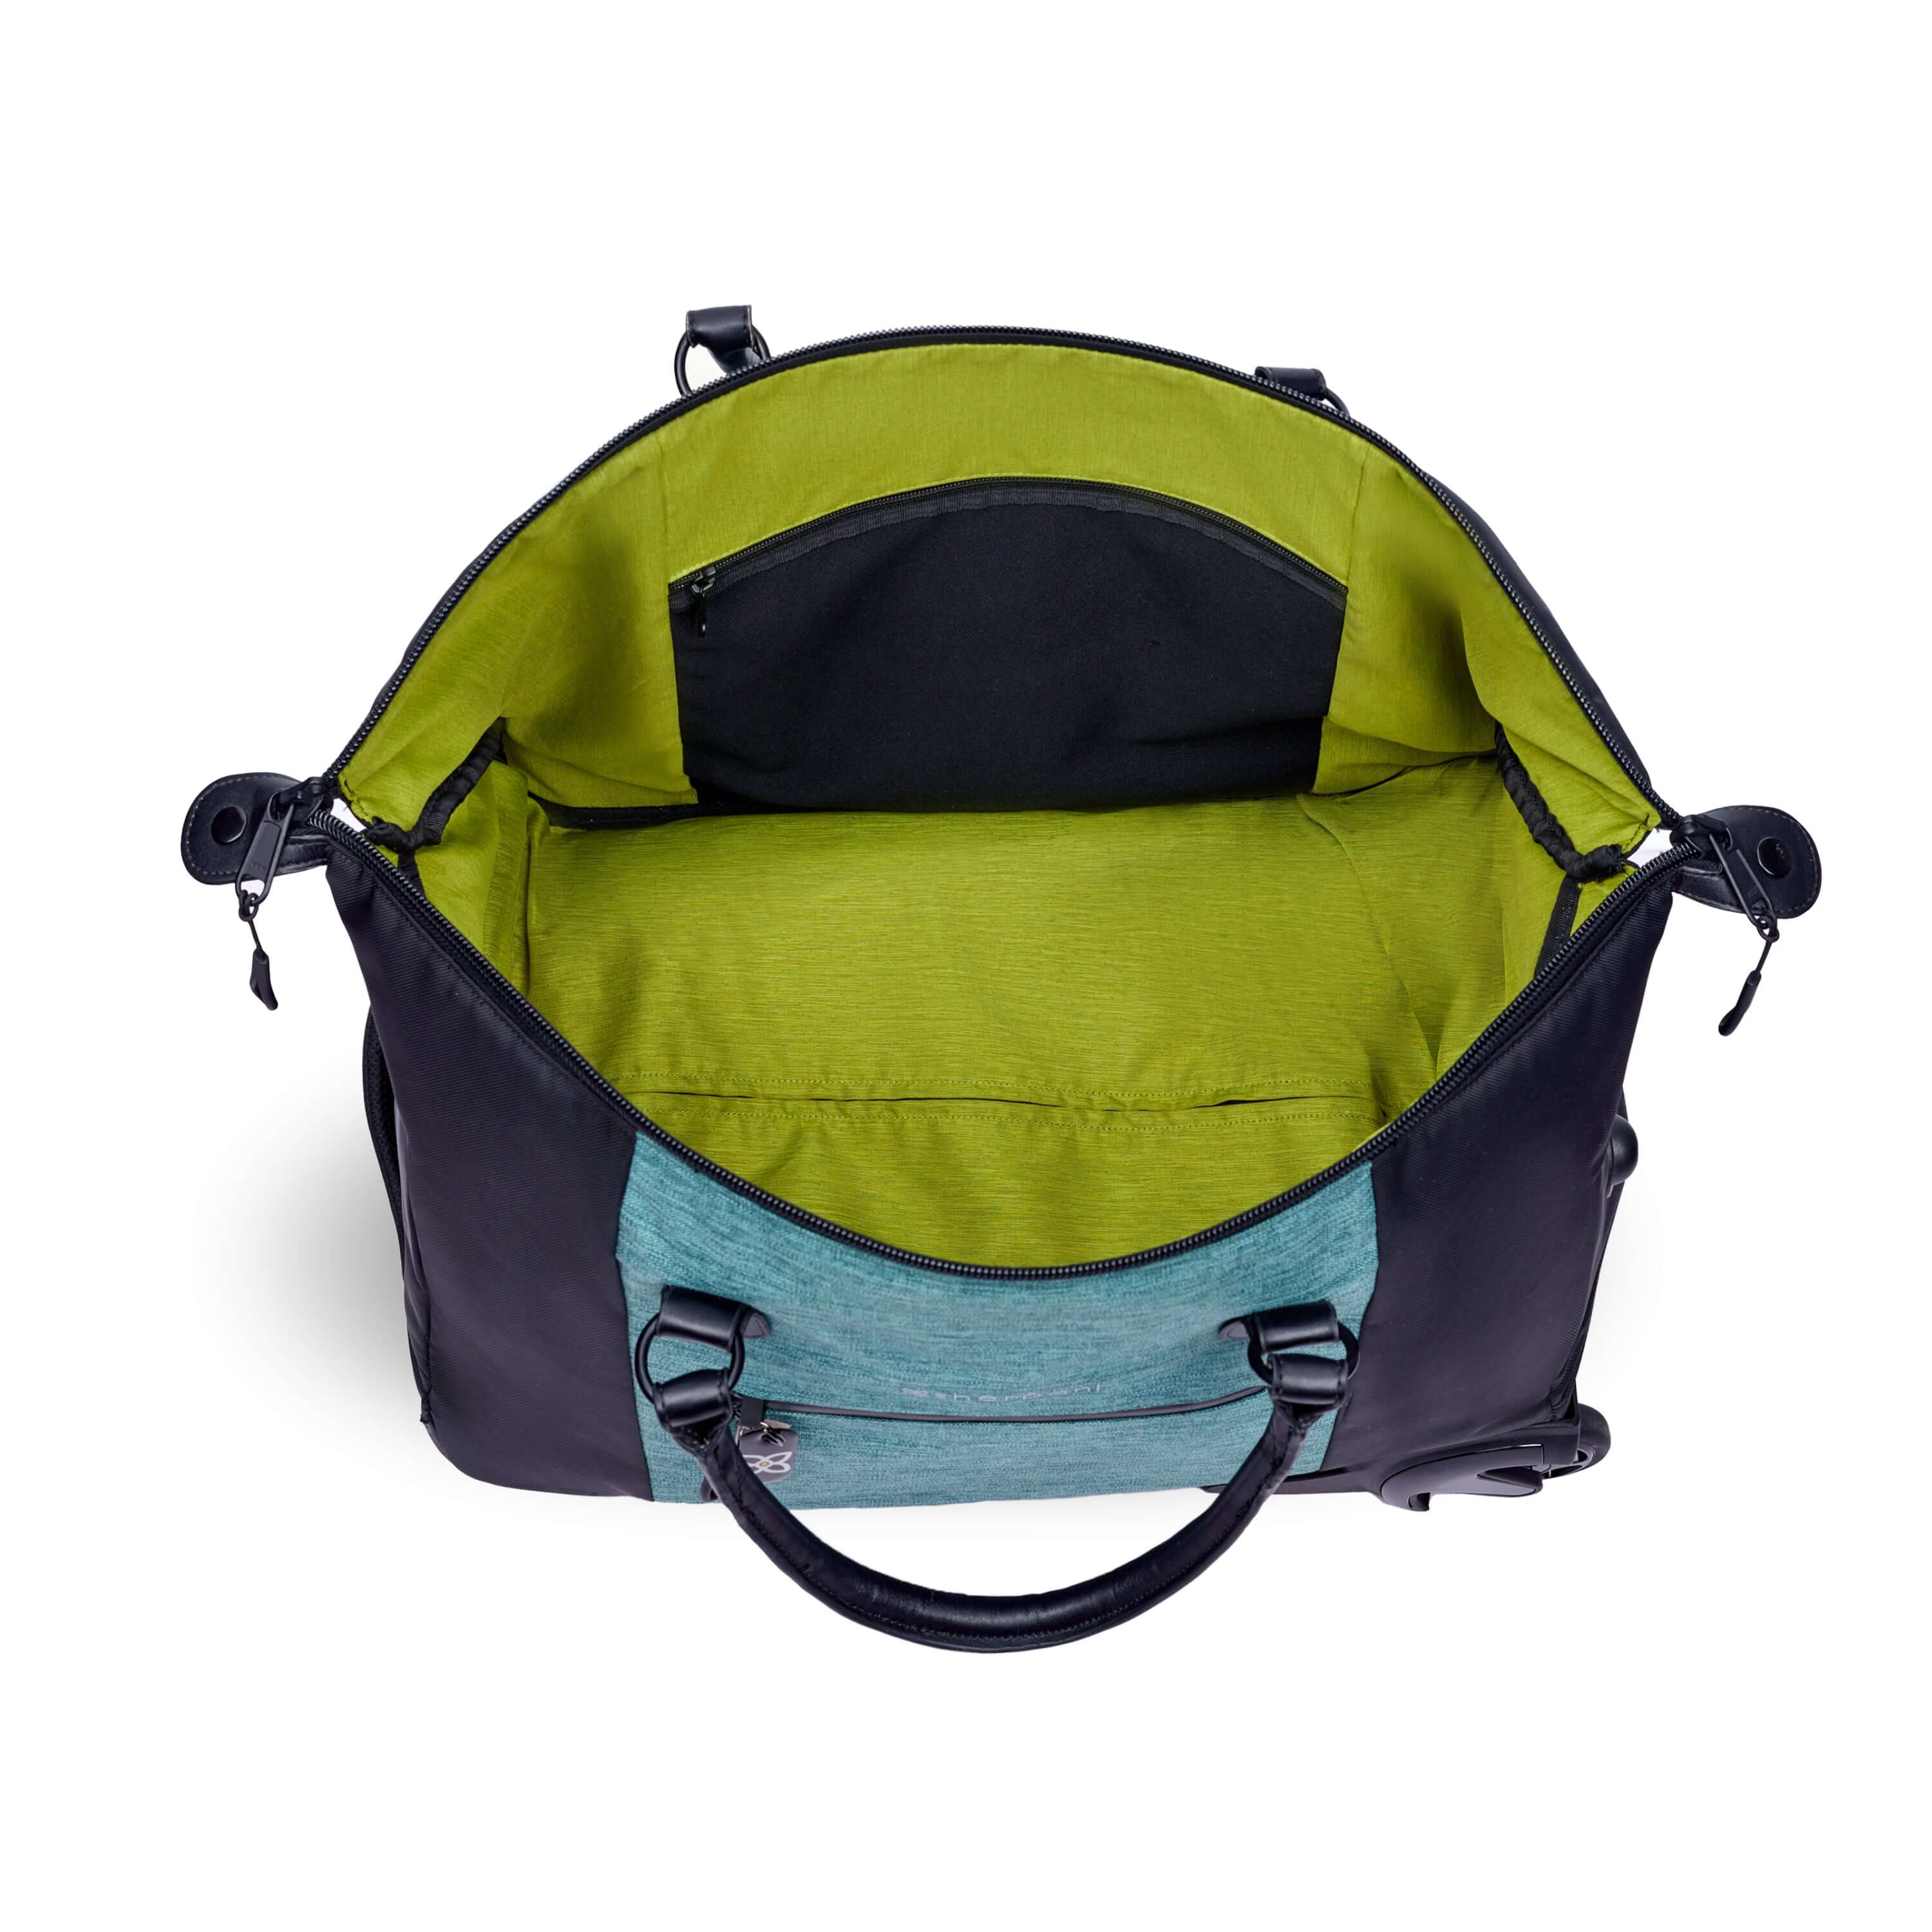 Top view of Sherpani’s Anti-Theft rolling duffle the Trip in Teal. The main zipper compartment is open showcasing a wide mouth and revealing a lime green interior with an internal zipper pocket. 